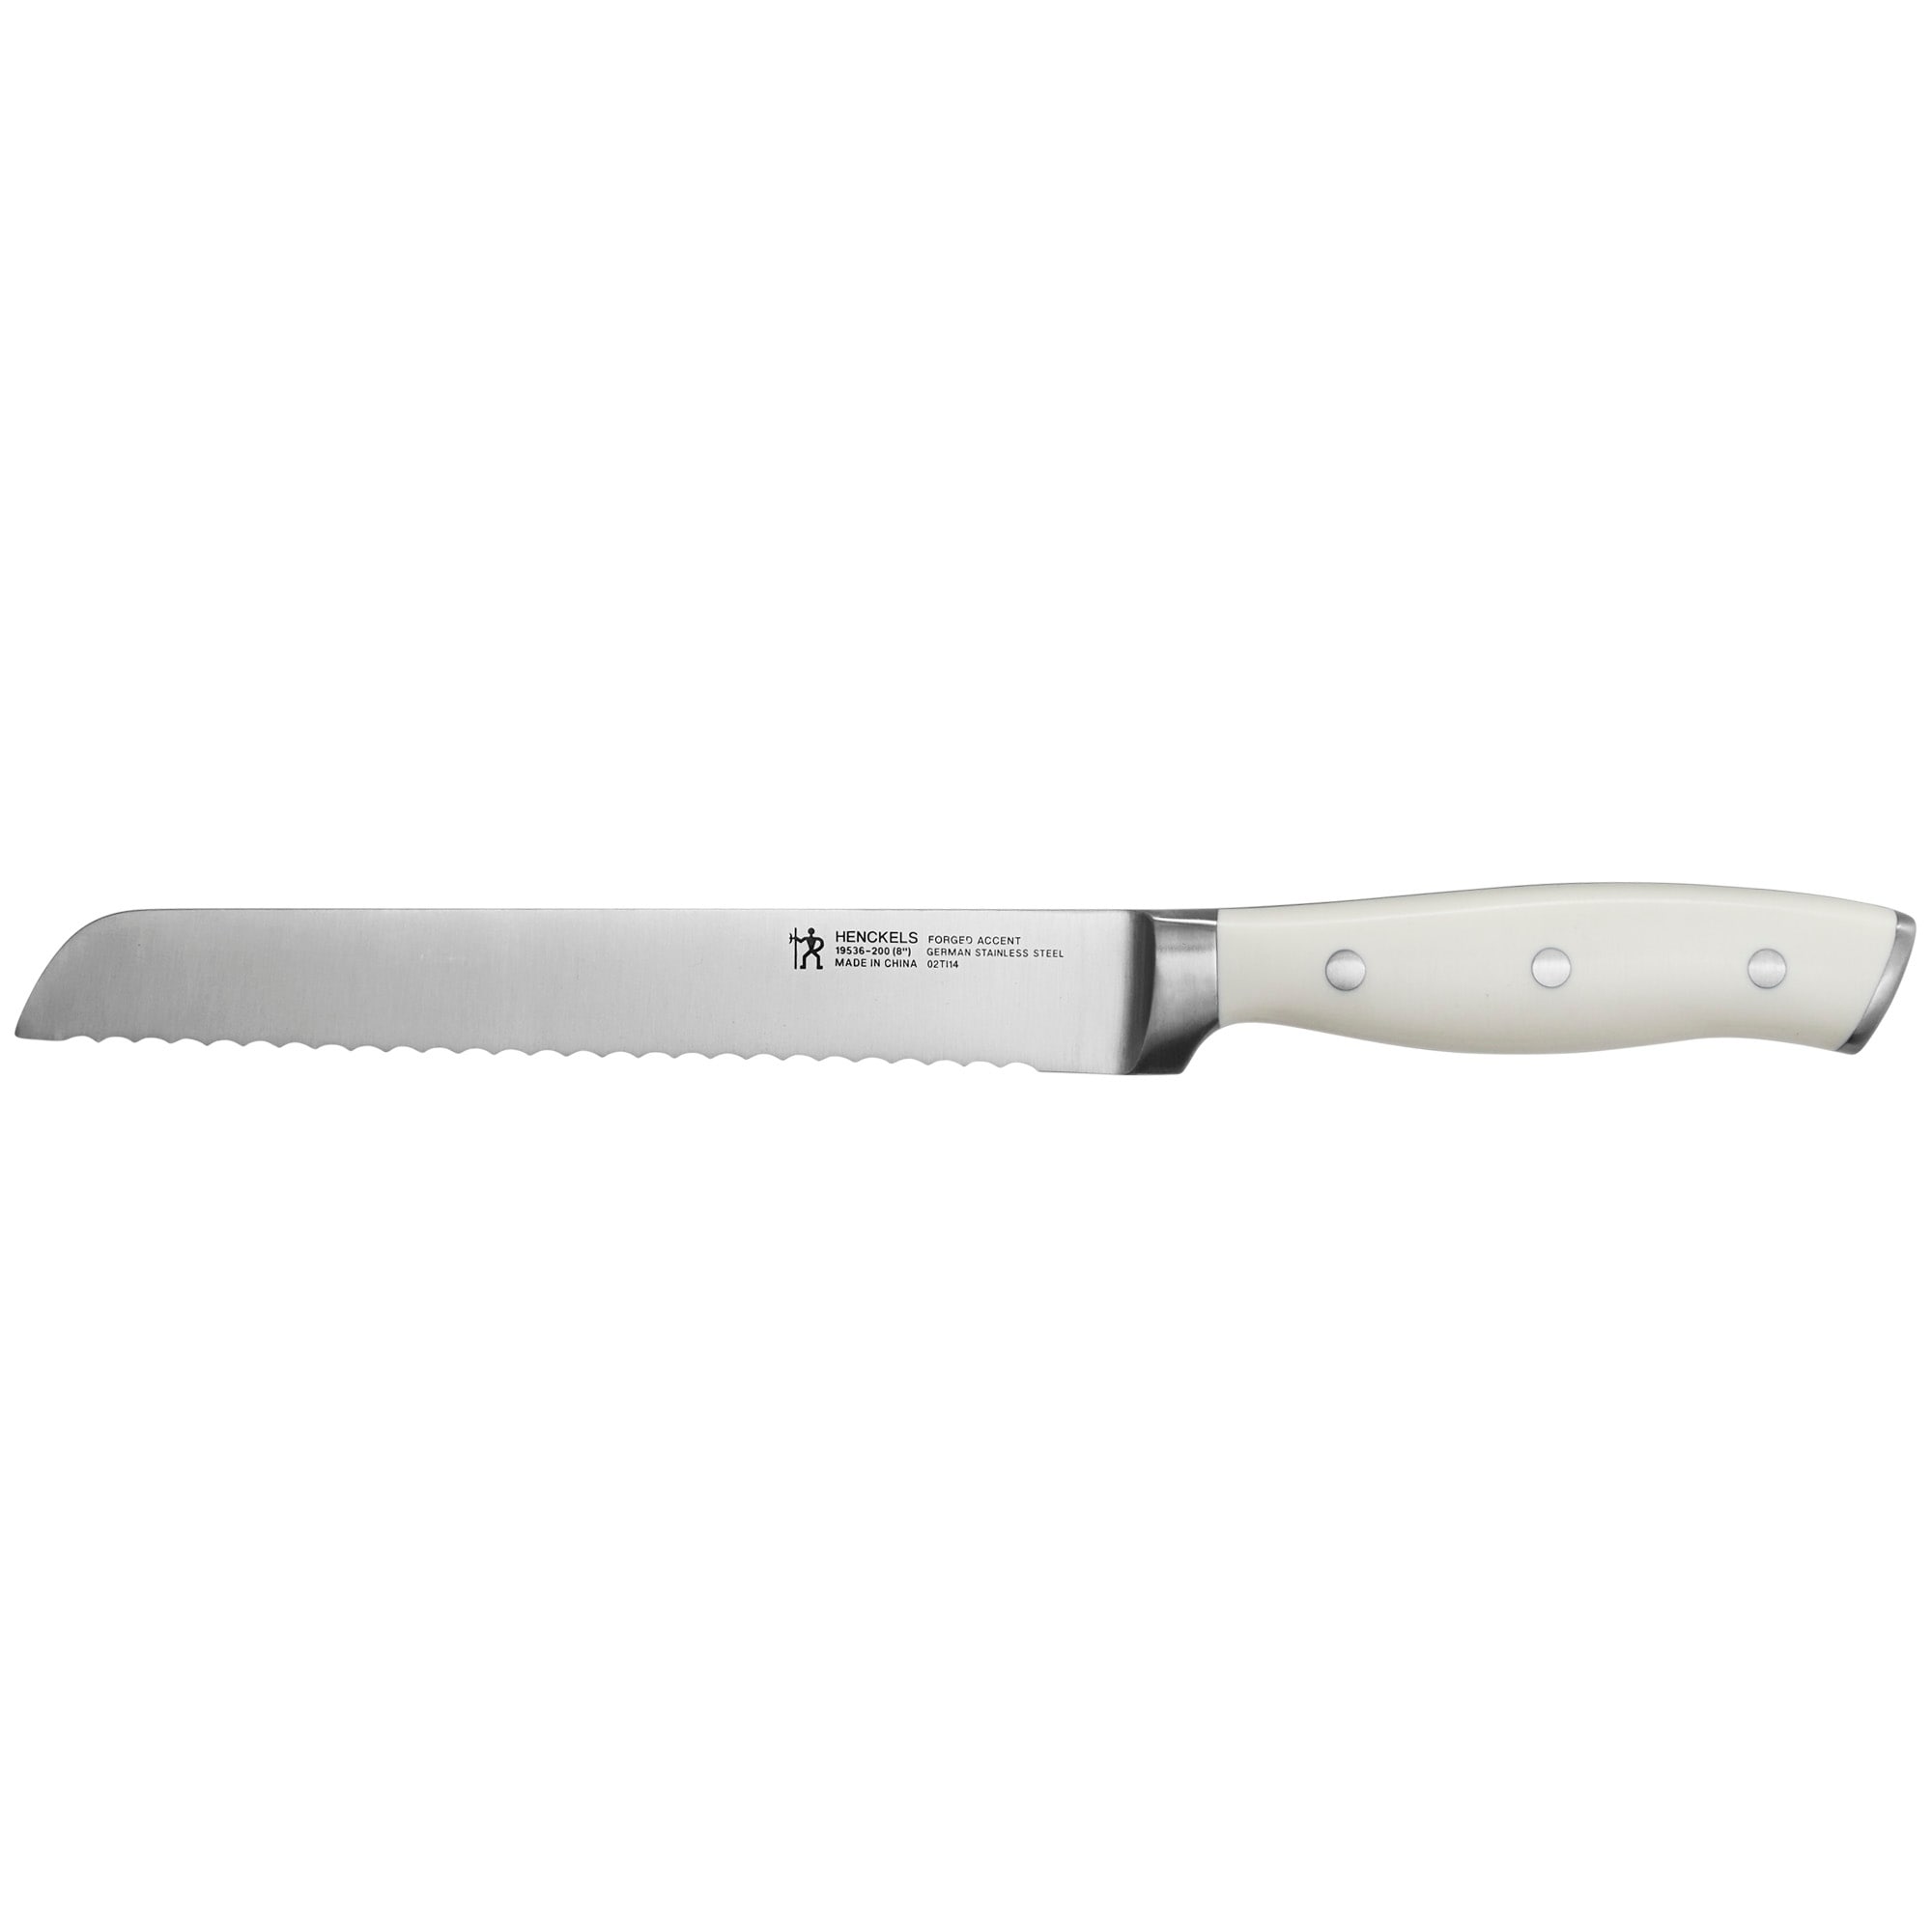 https://ak1.ostkcdn.com/images/products/is/images/direct/650c877564eef35e8d18fe02a7eccd4af532db77/Henckels-Forged-Accent-8-inch-Bread-Knife---White-Handle.jpg